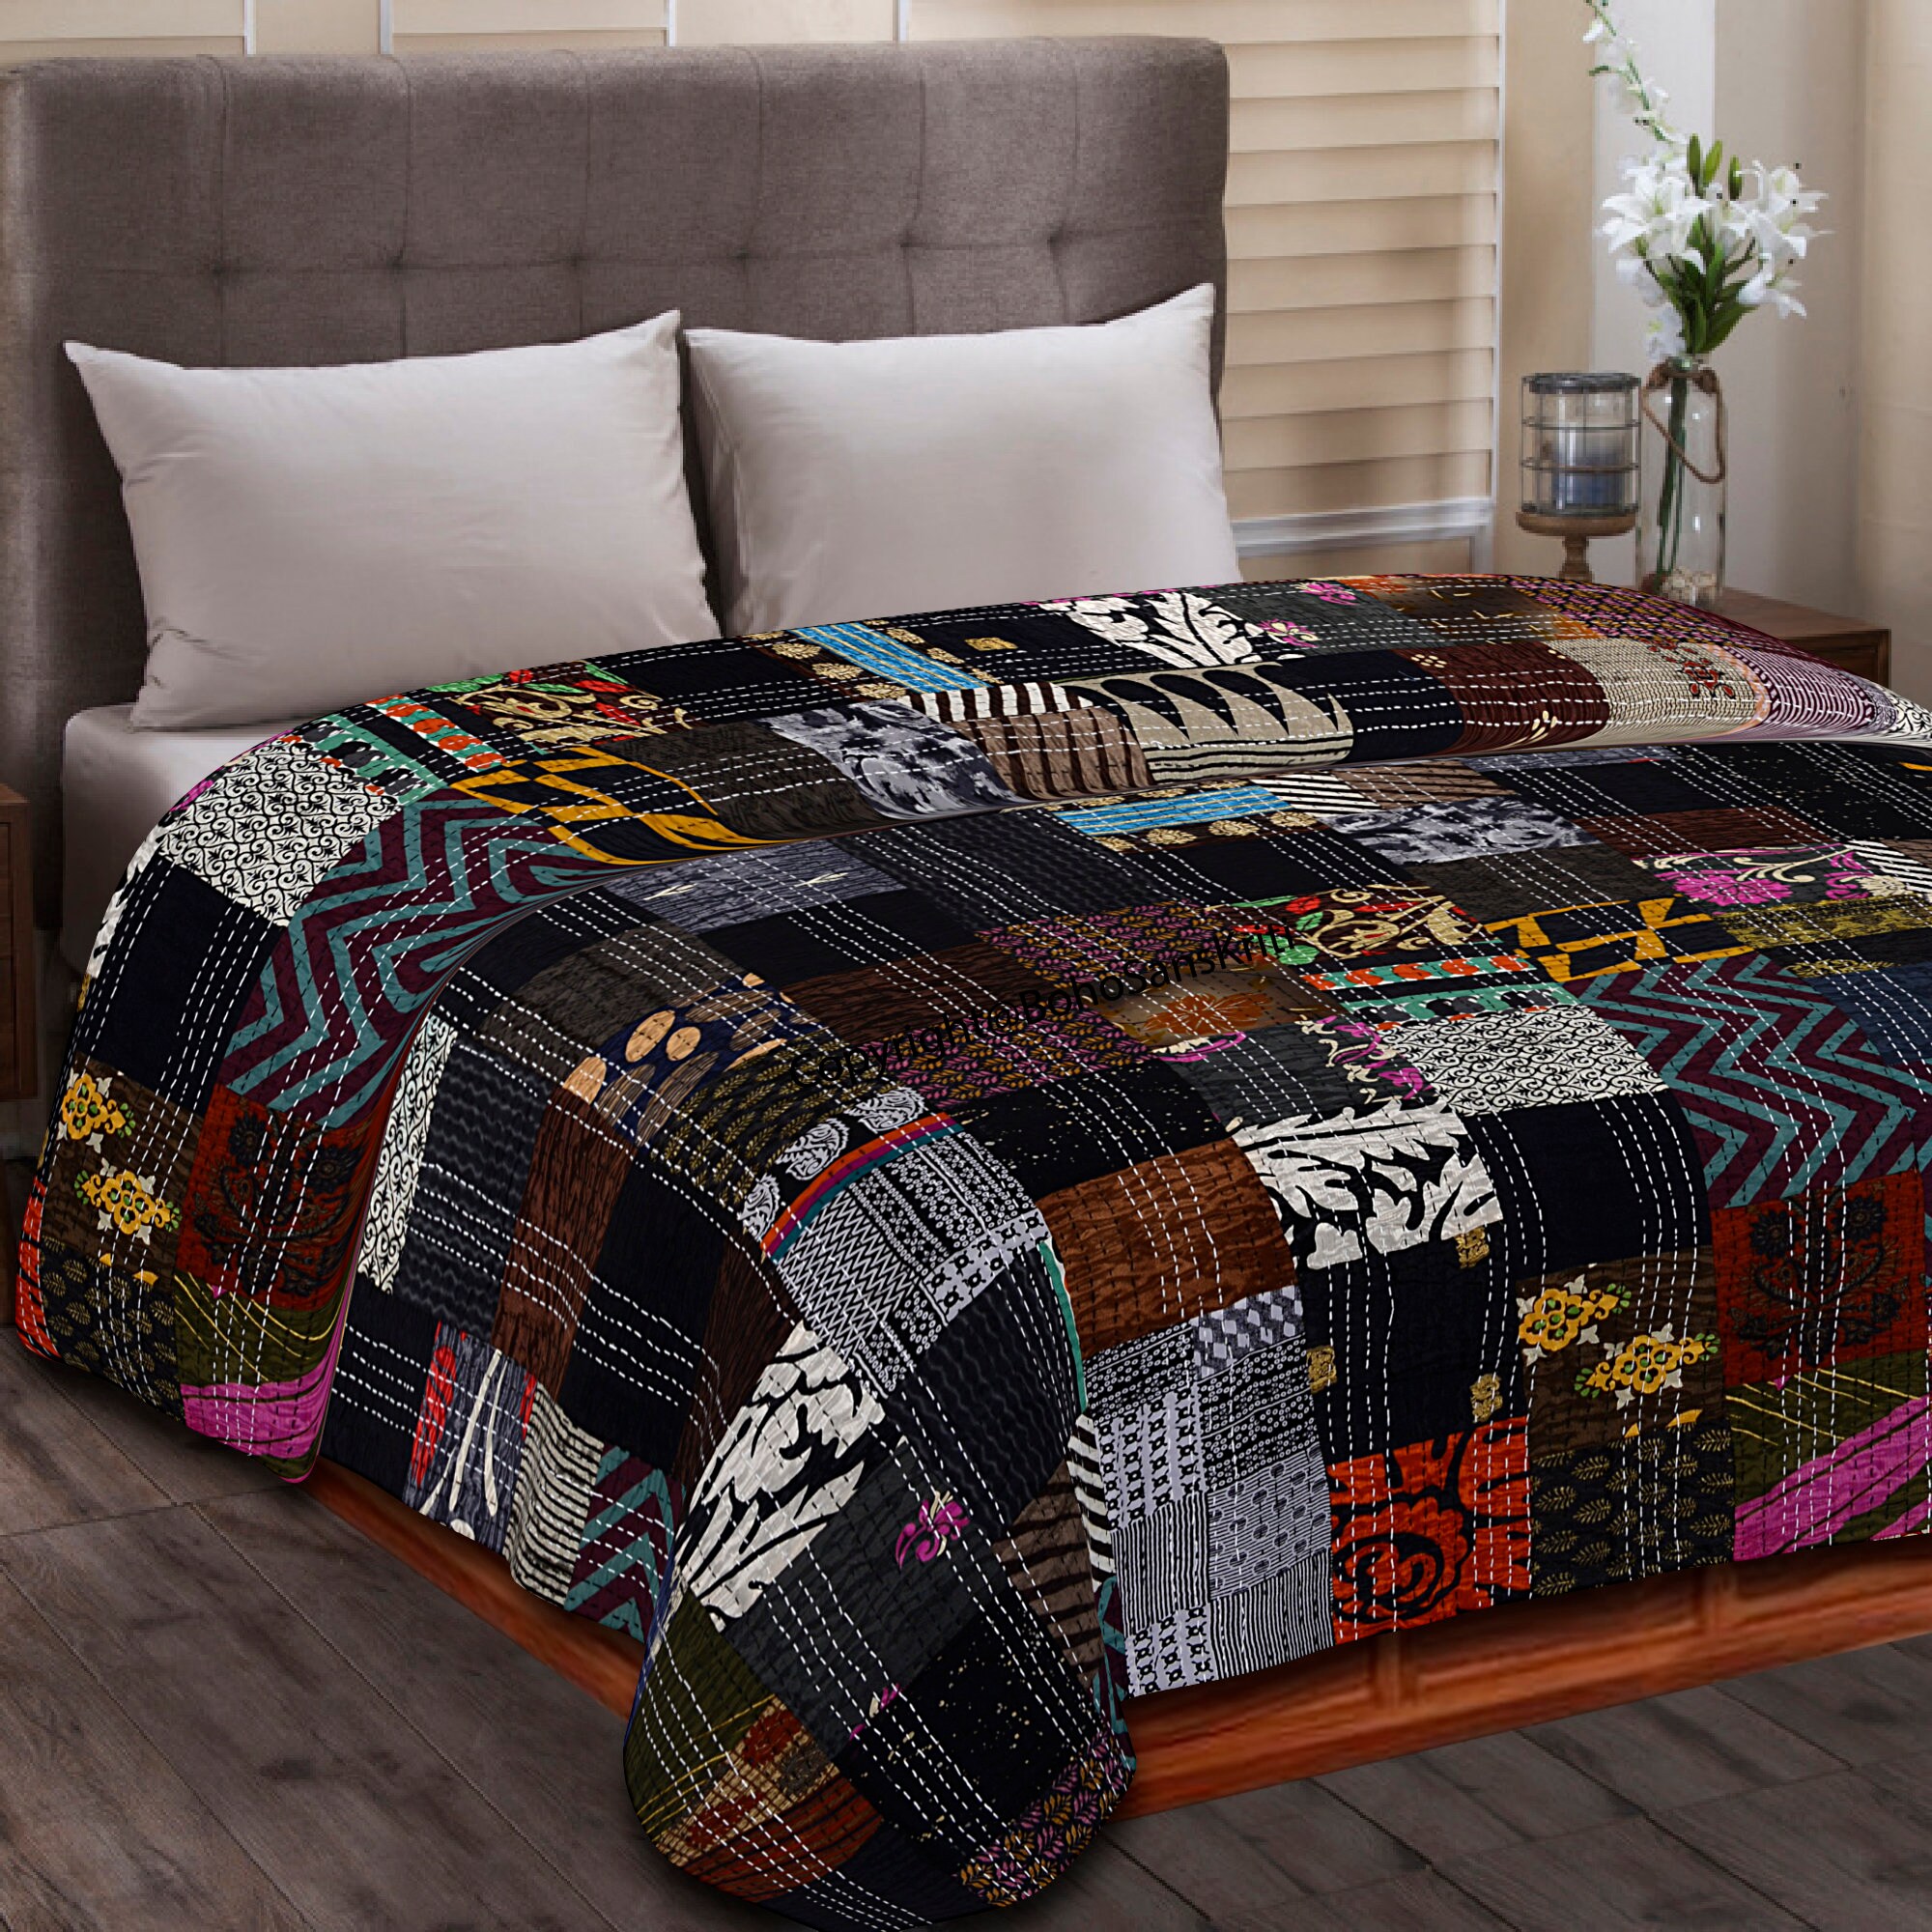 Bohemian Traditional Indian Patchwork Quilt King Size Hippie Quilt Vintage Quilted Blanket Throw Bedspread Cotton Silk Kantha Quilt Bedding